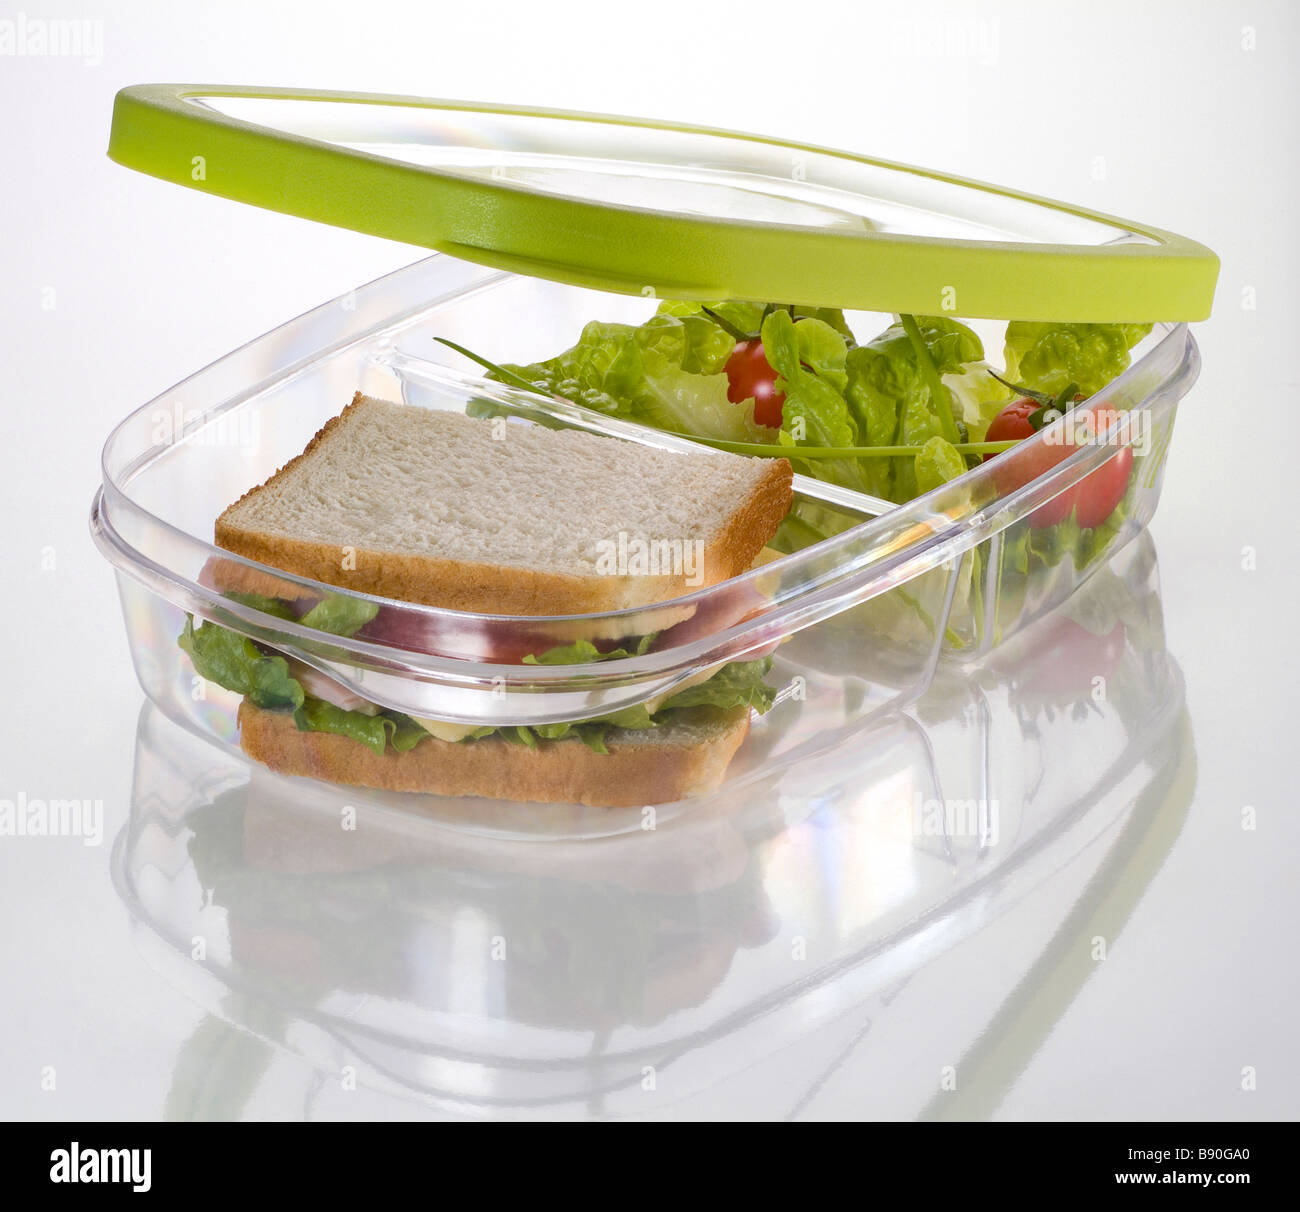 Plastic food coontainer with sandwich and salad Stock Photo